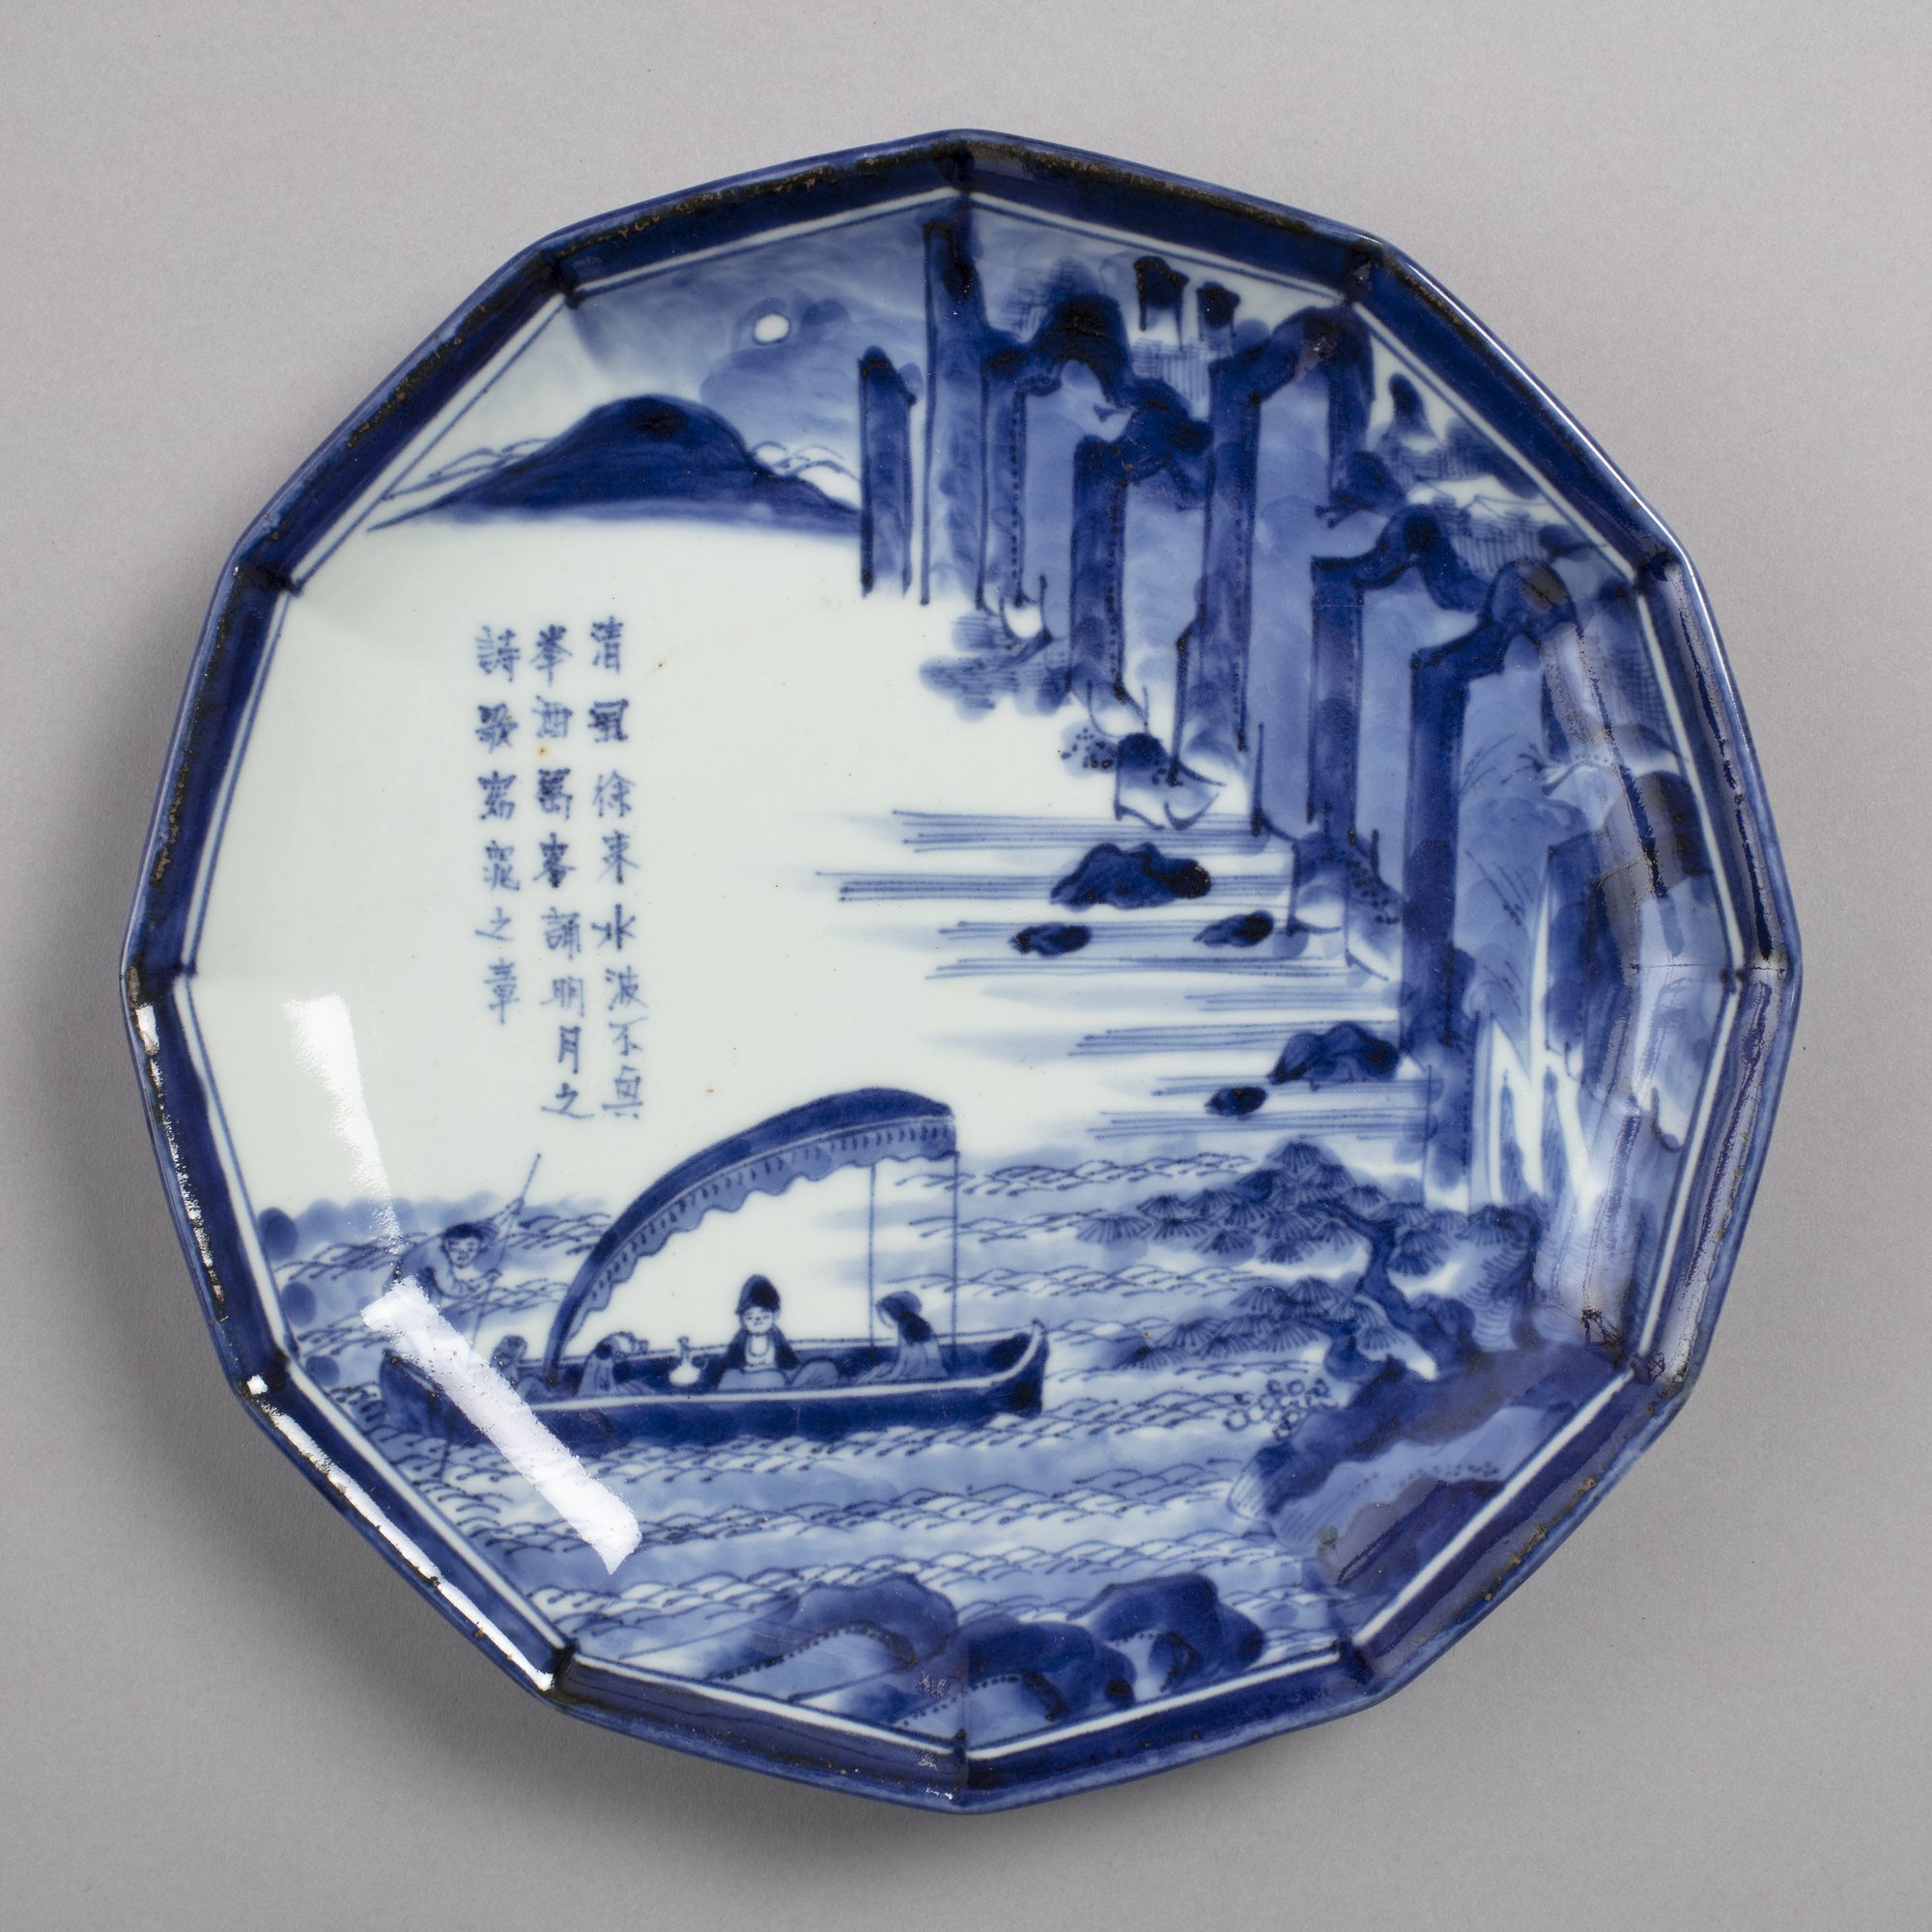 Dish with design of the ‘Red Cliffs’ in blue on white